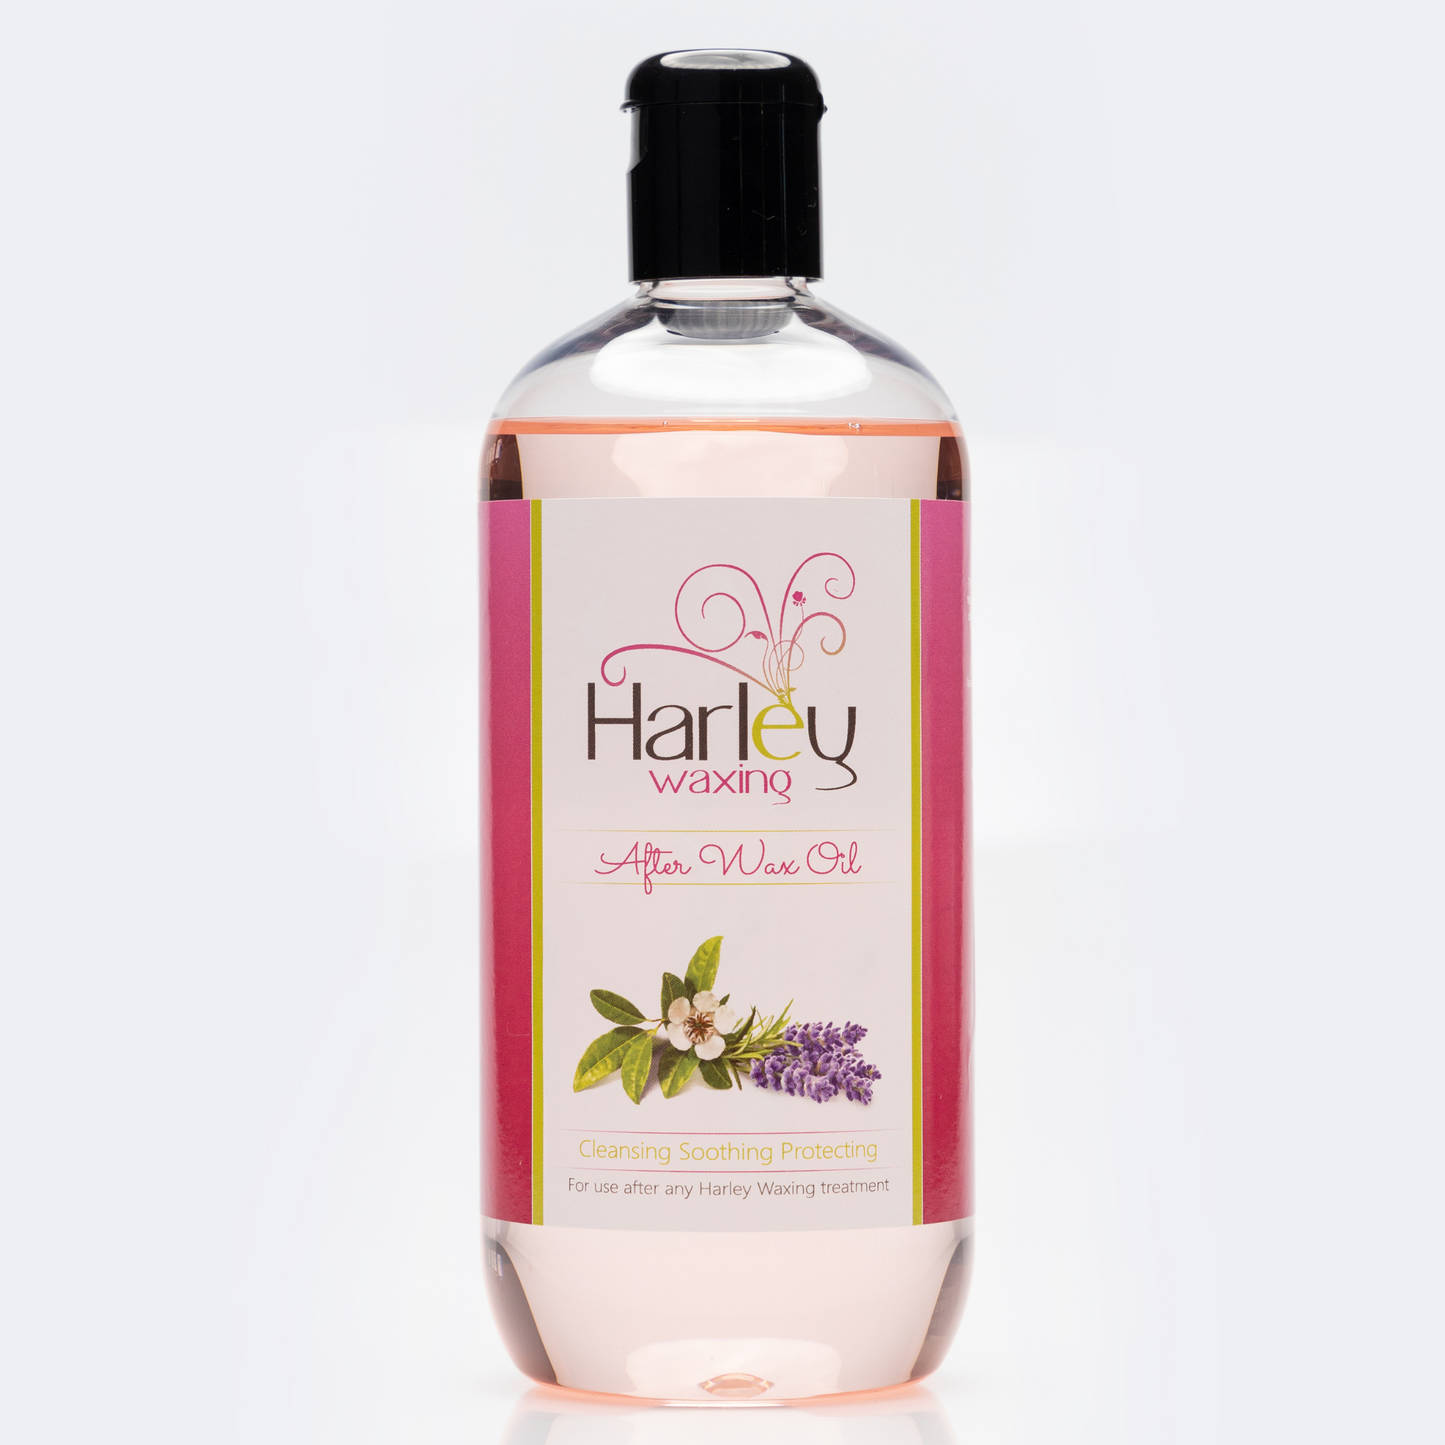 Harley Waxing After Wax Oil which is made with Lavender and Tea Tree to soothe the skin after the waxing treatment. 